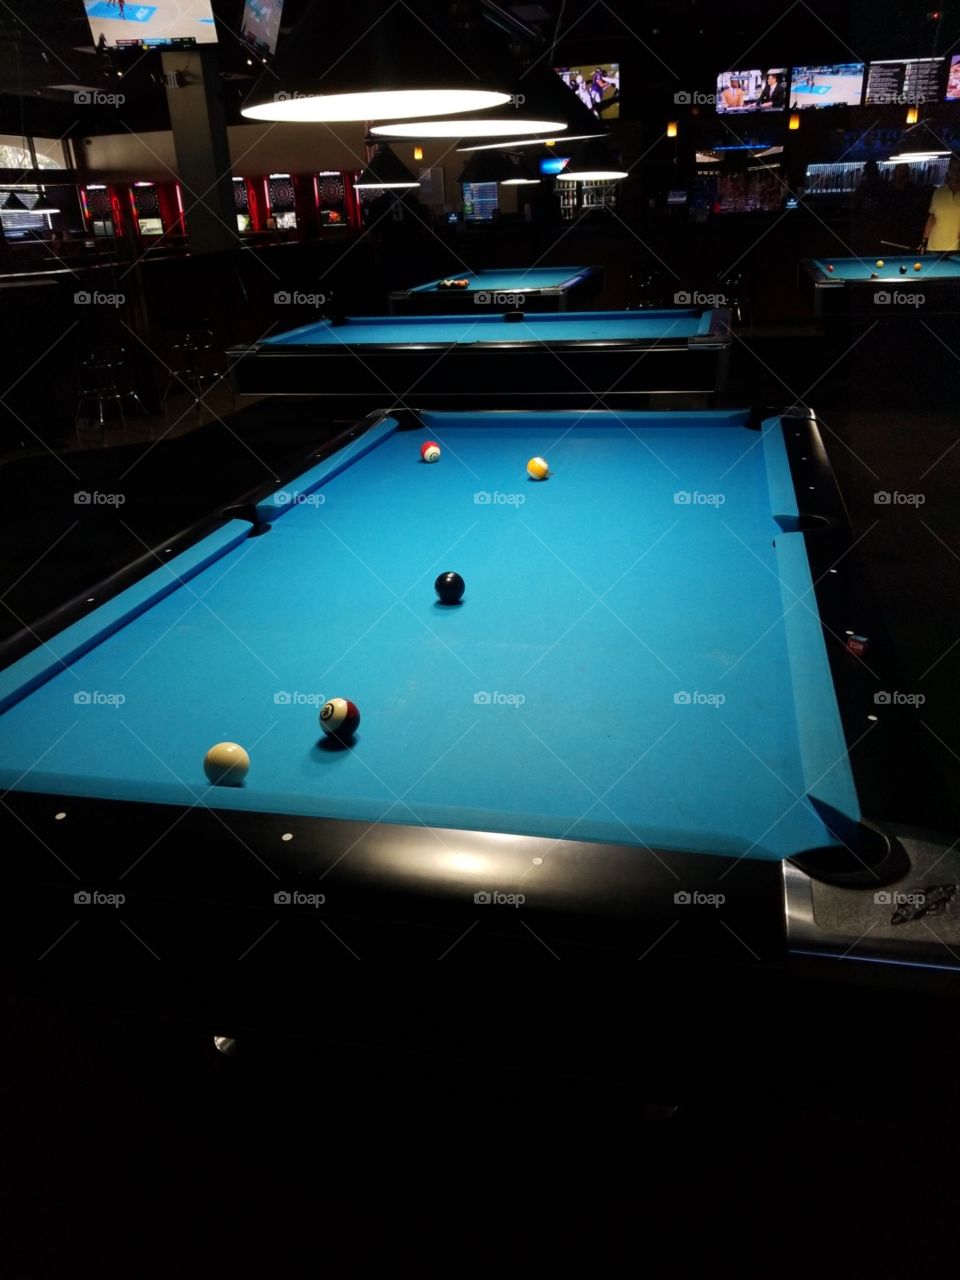 playing pool is my hobby